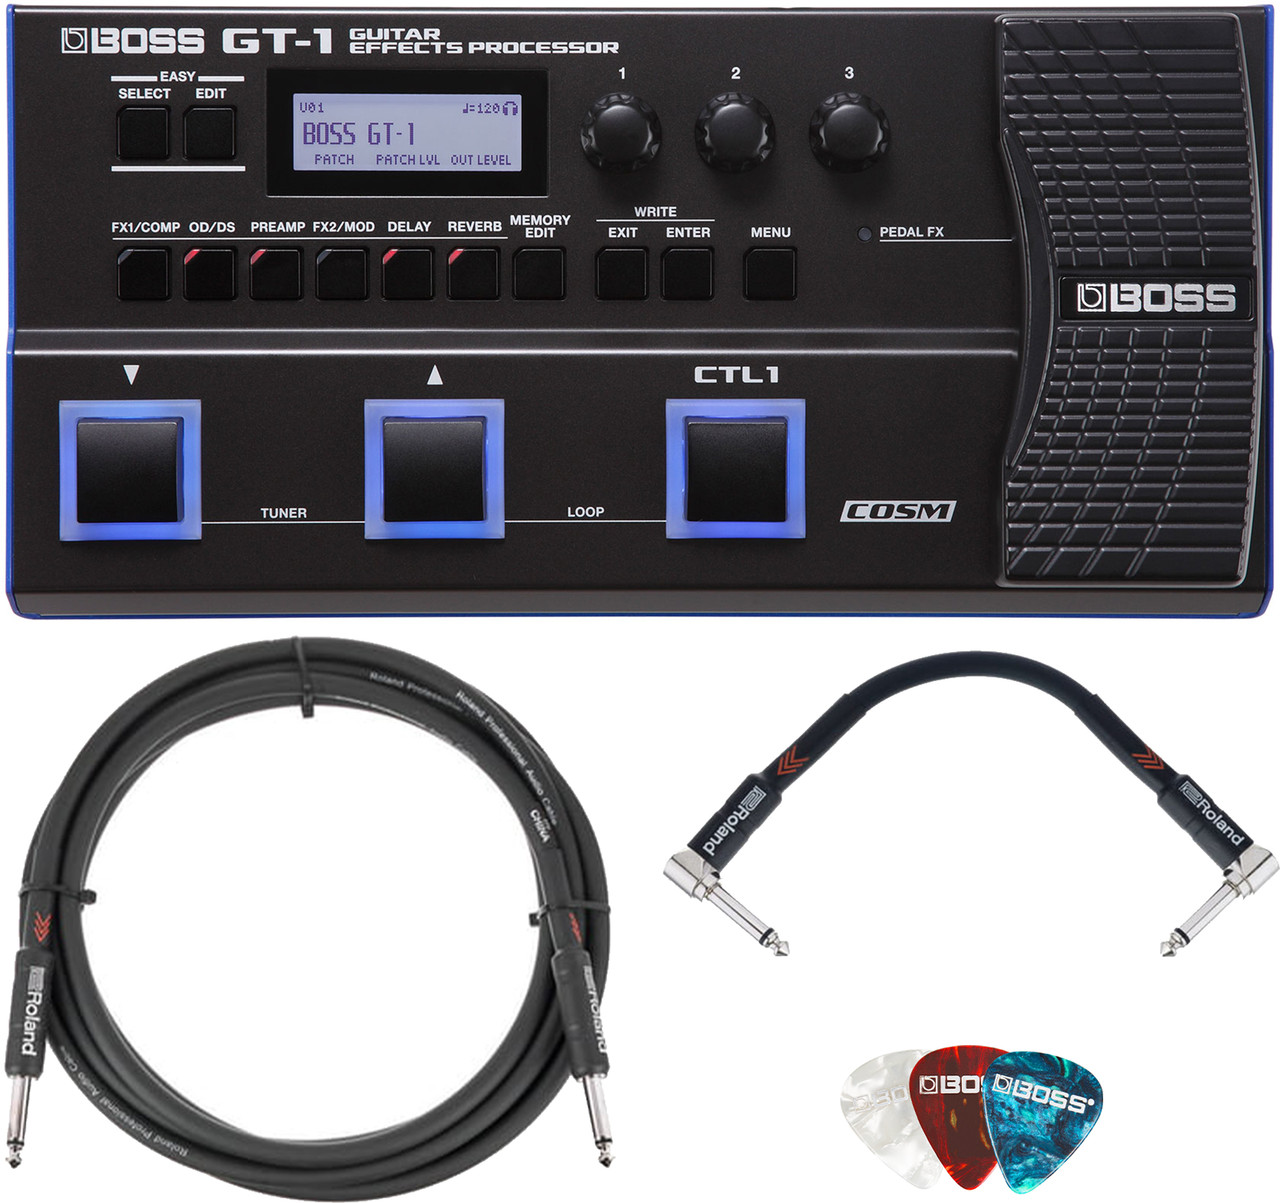  Boss GT-1000CORE Guitar Effects Processor Bundle with Power  Supply, Instrument Cable, Patch Cable, and Picks : Musical Instruments